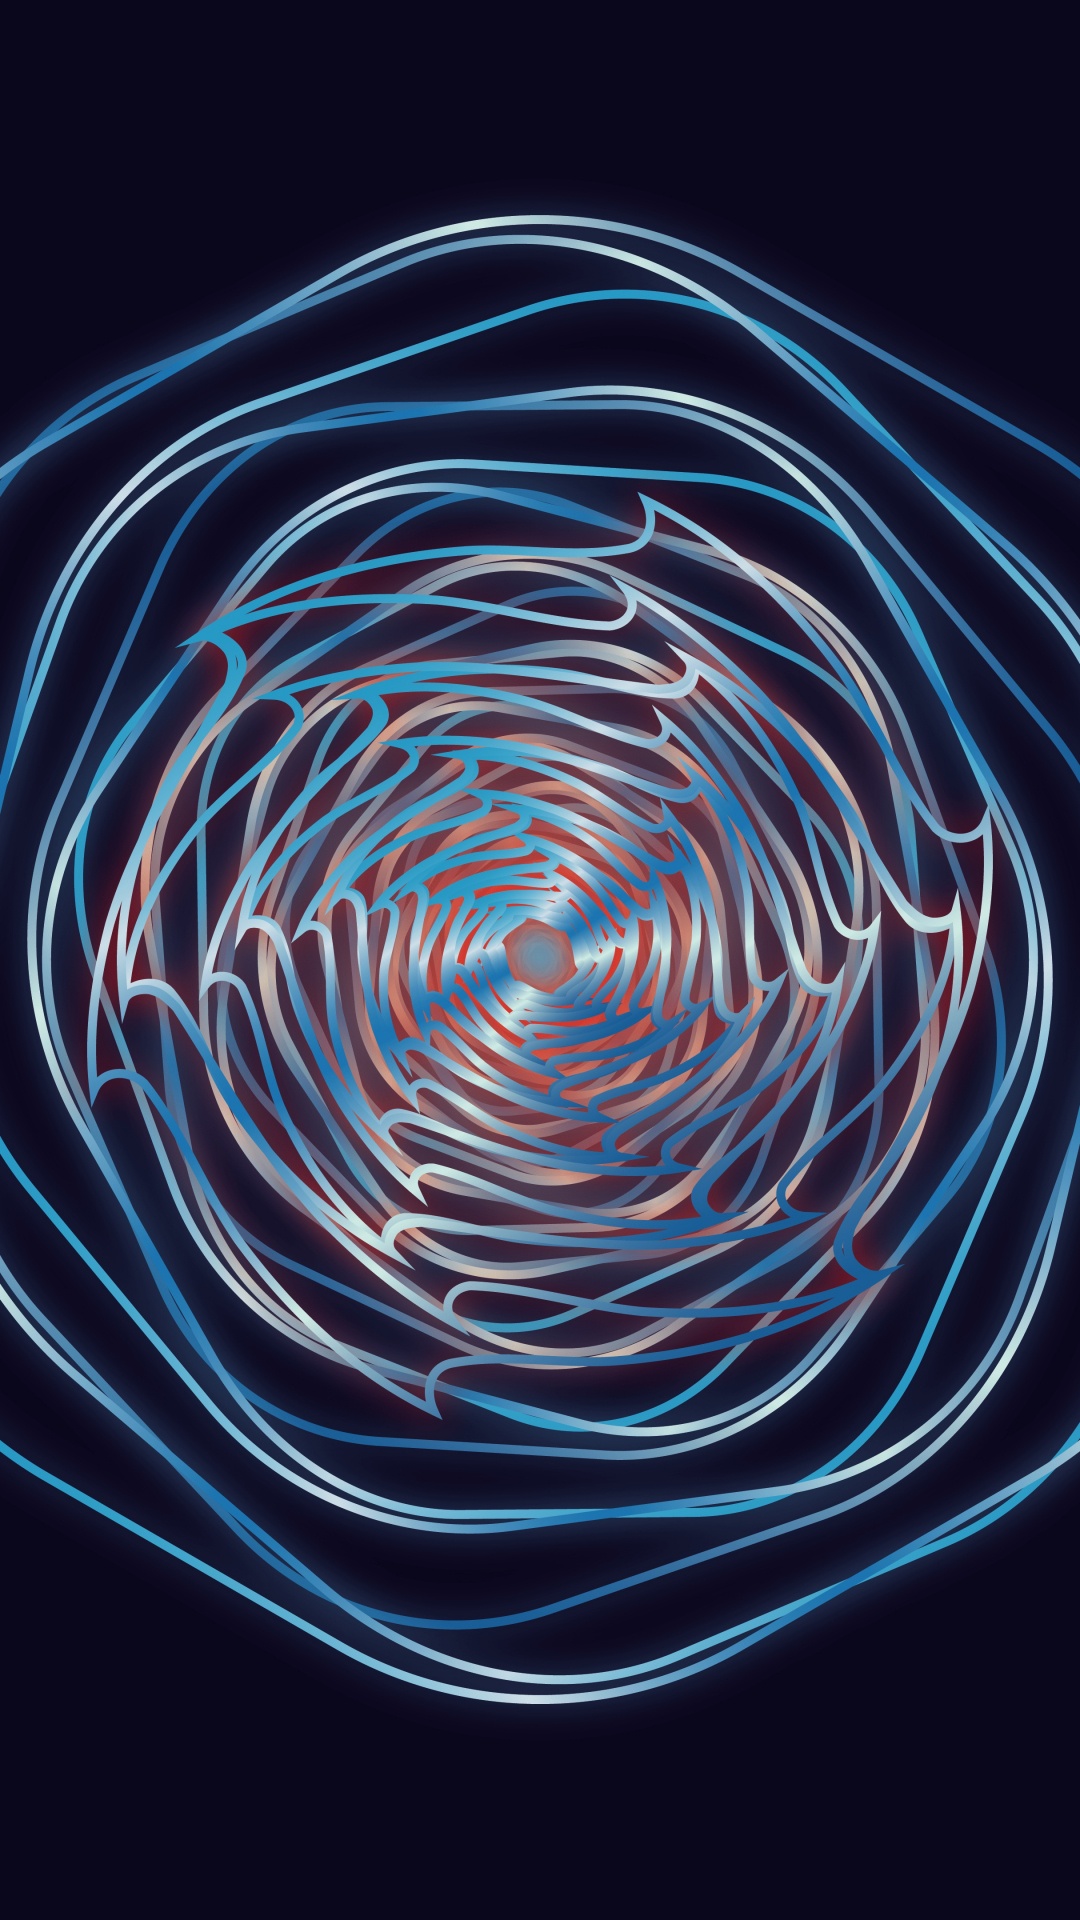 Blue and White Spiral Light. Wallpaper in 1080x1920 Resolution